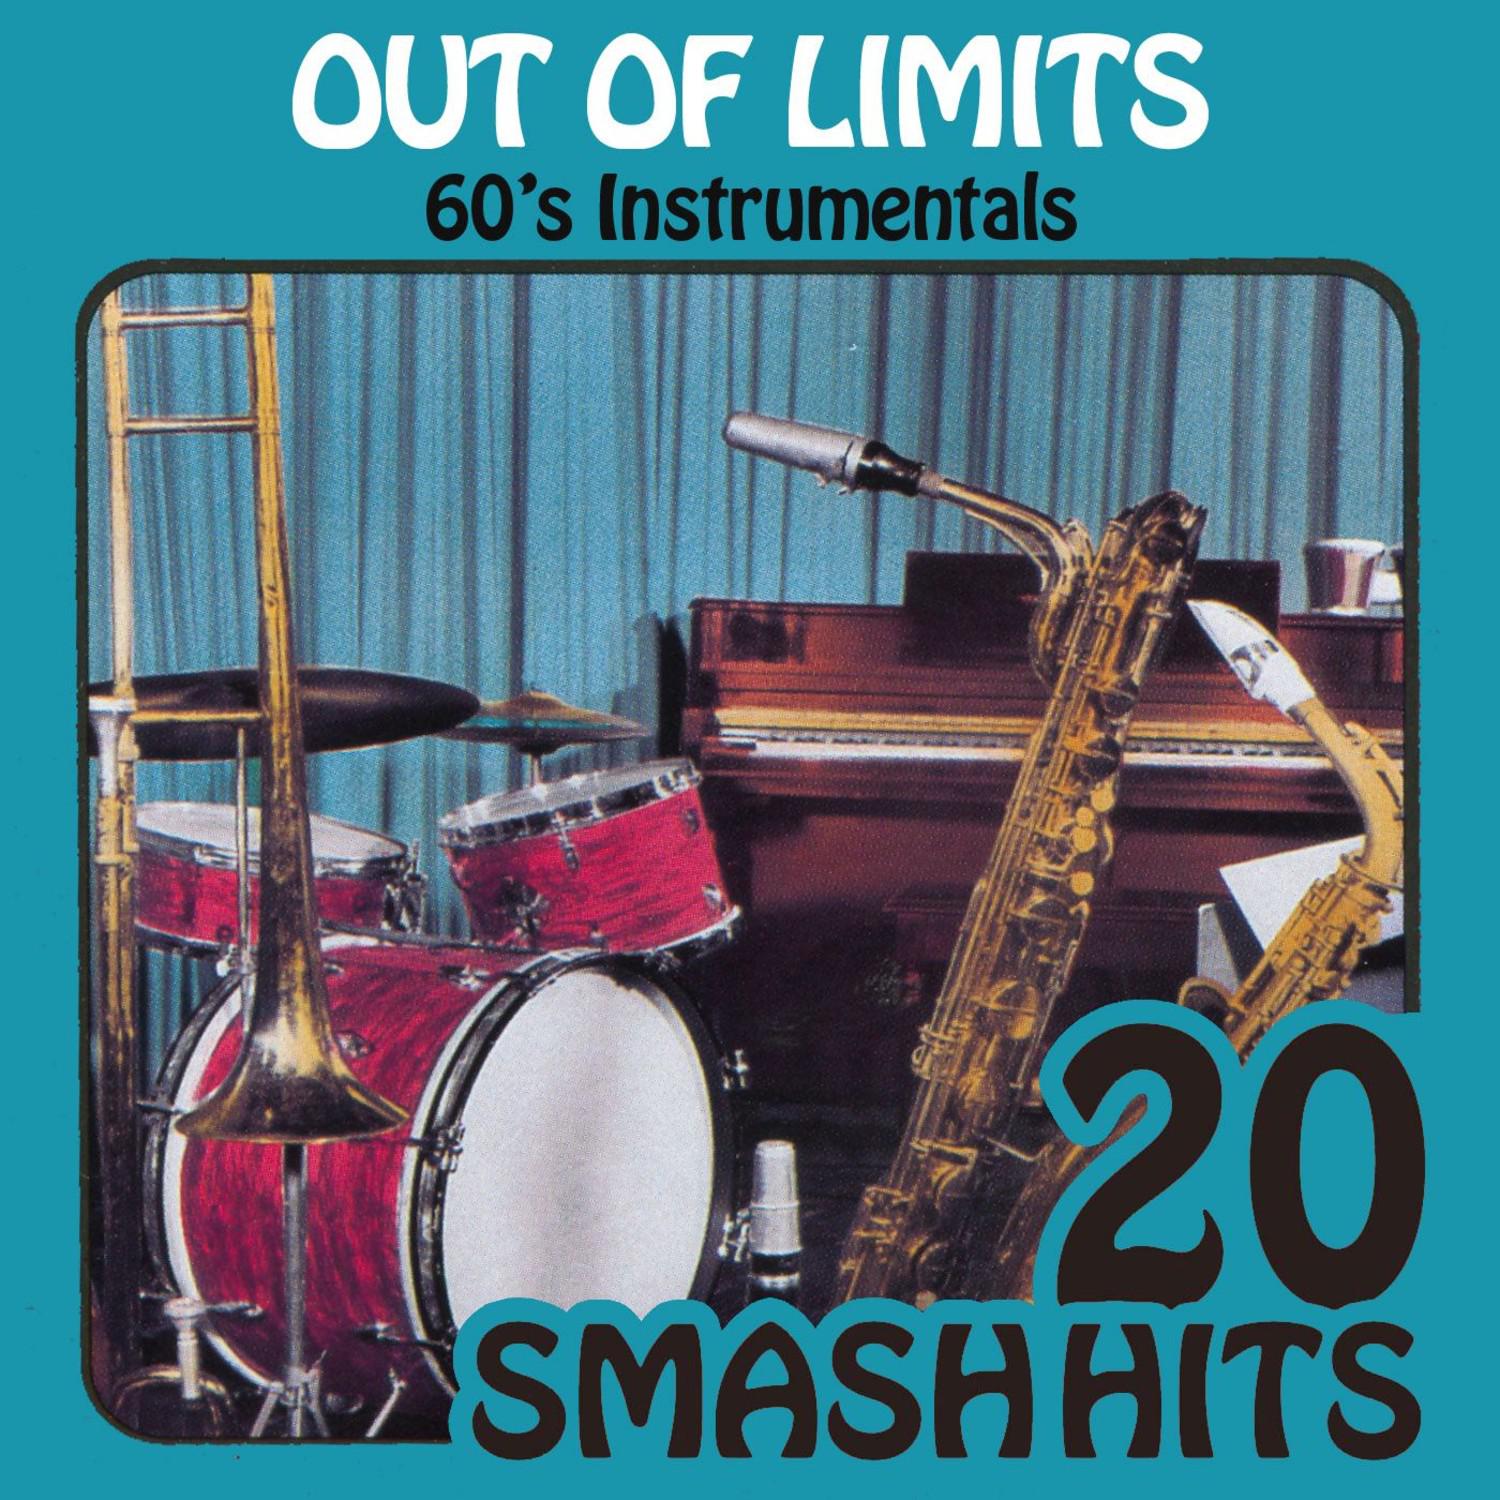 60's Instrumentals - Out Of Limits